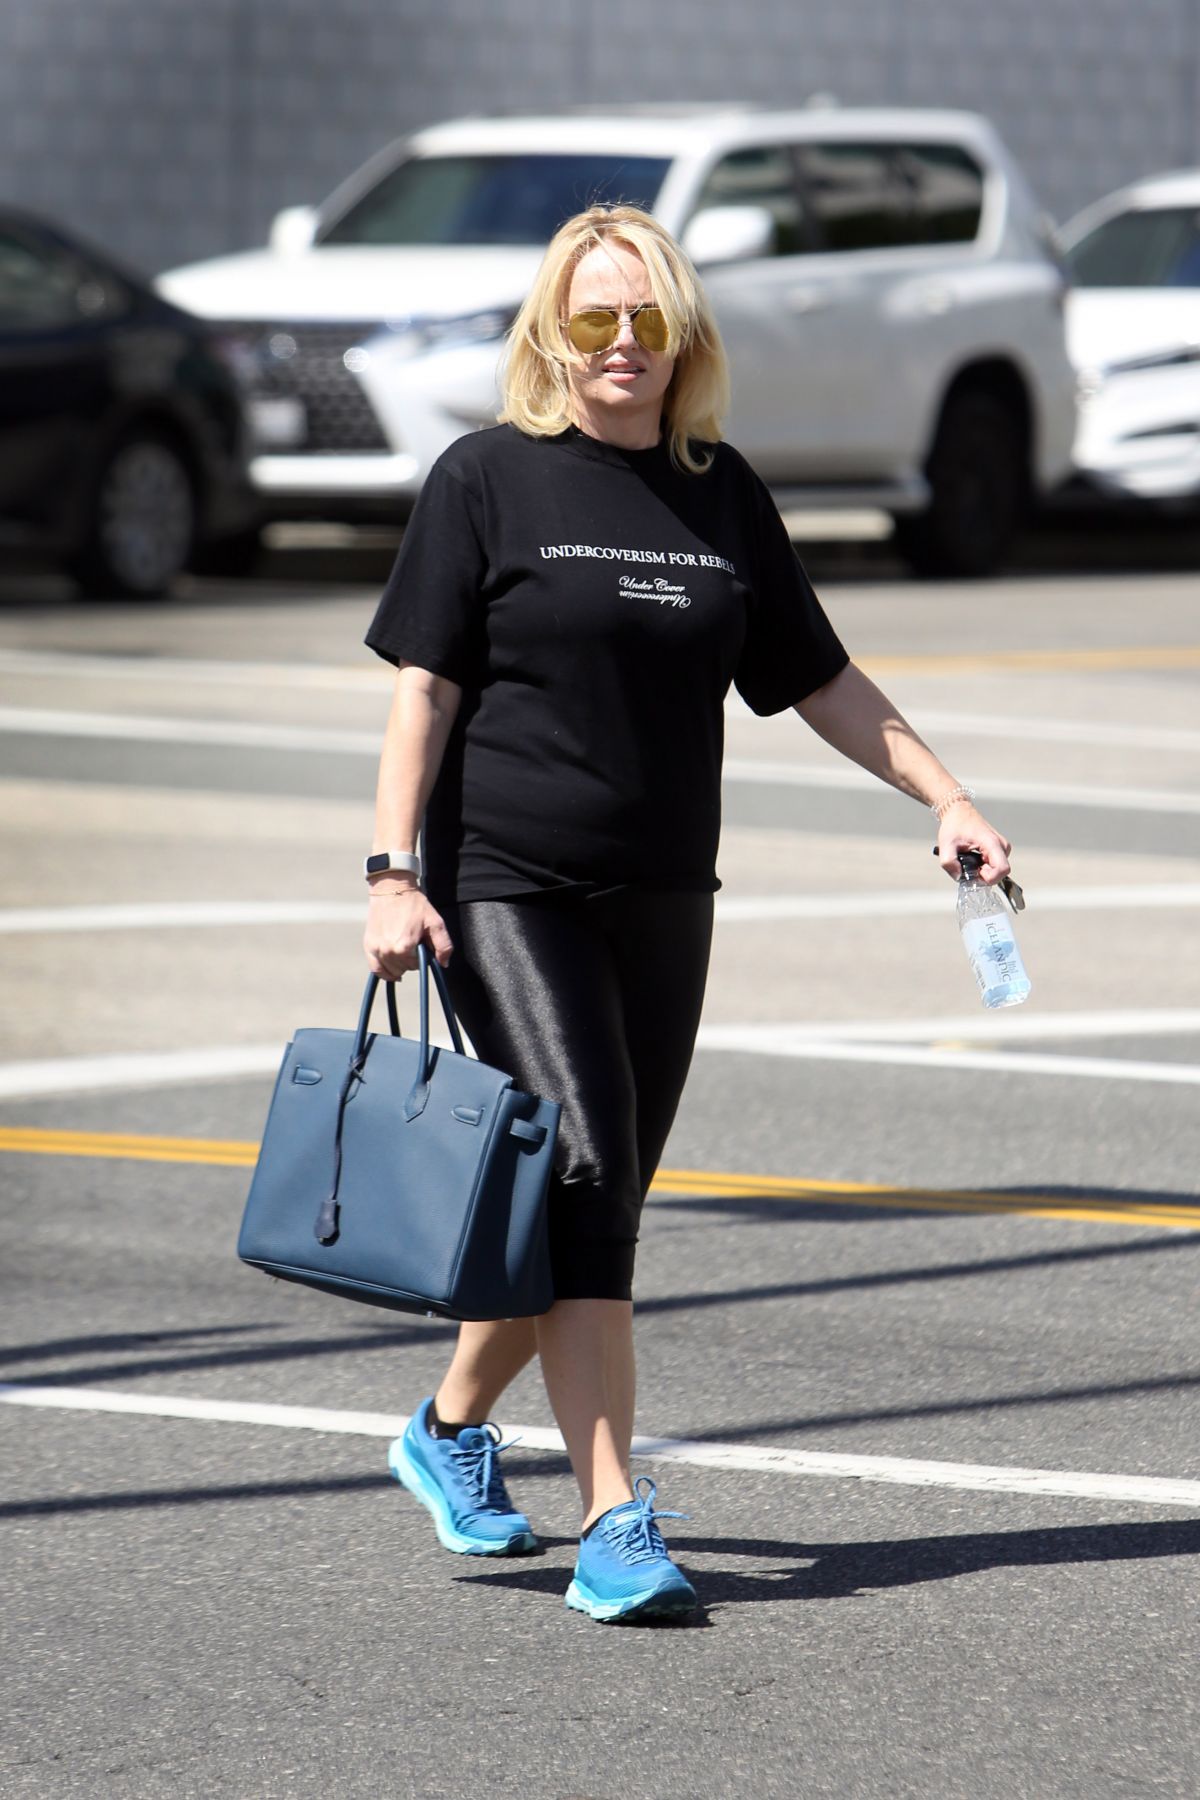 rebel wilson hEADING to DryBar for blowout in Hollywood 10/04/2022 ...